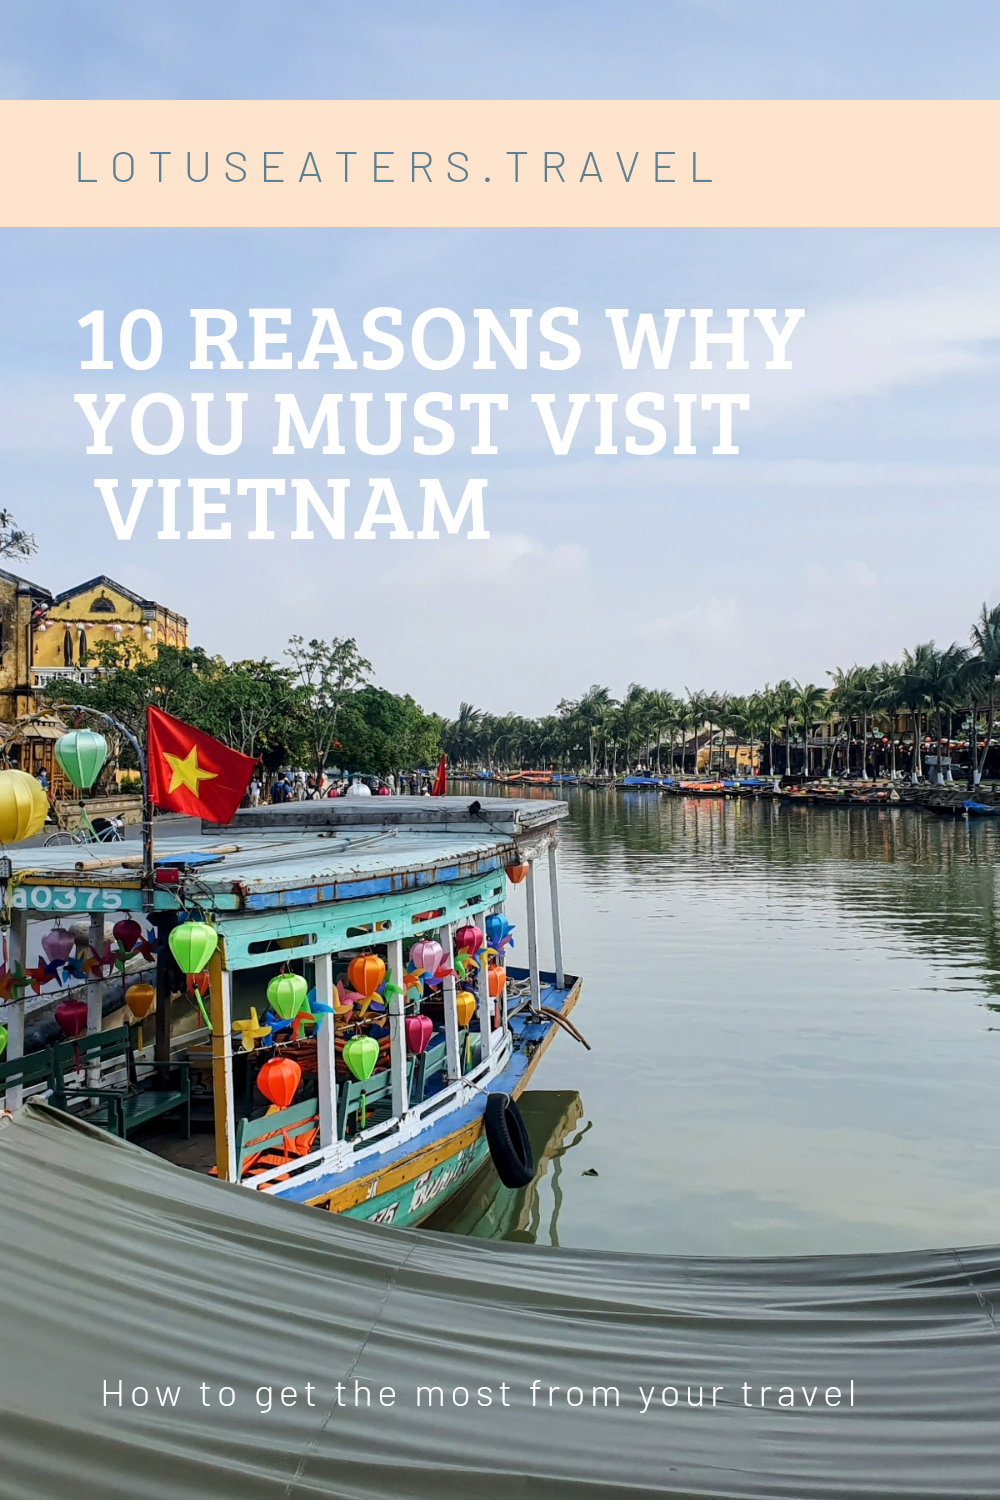 10 reasons why you must visit Vietnam